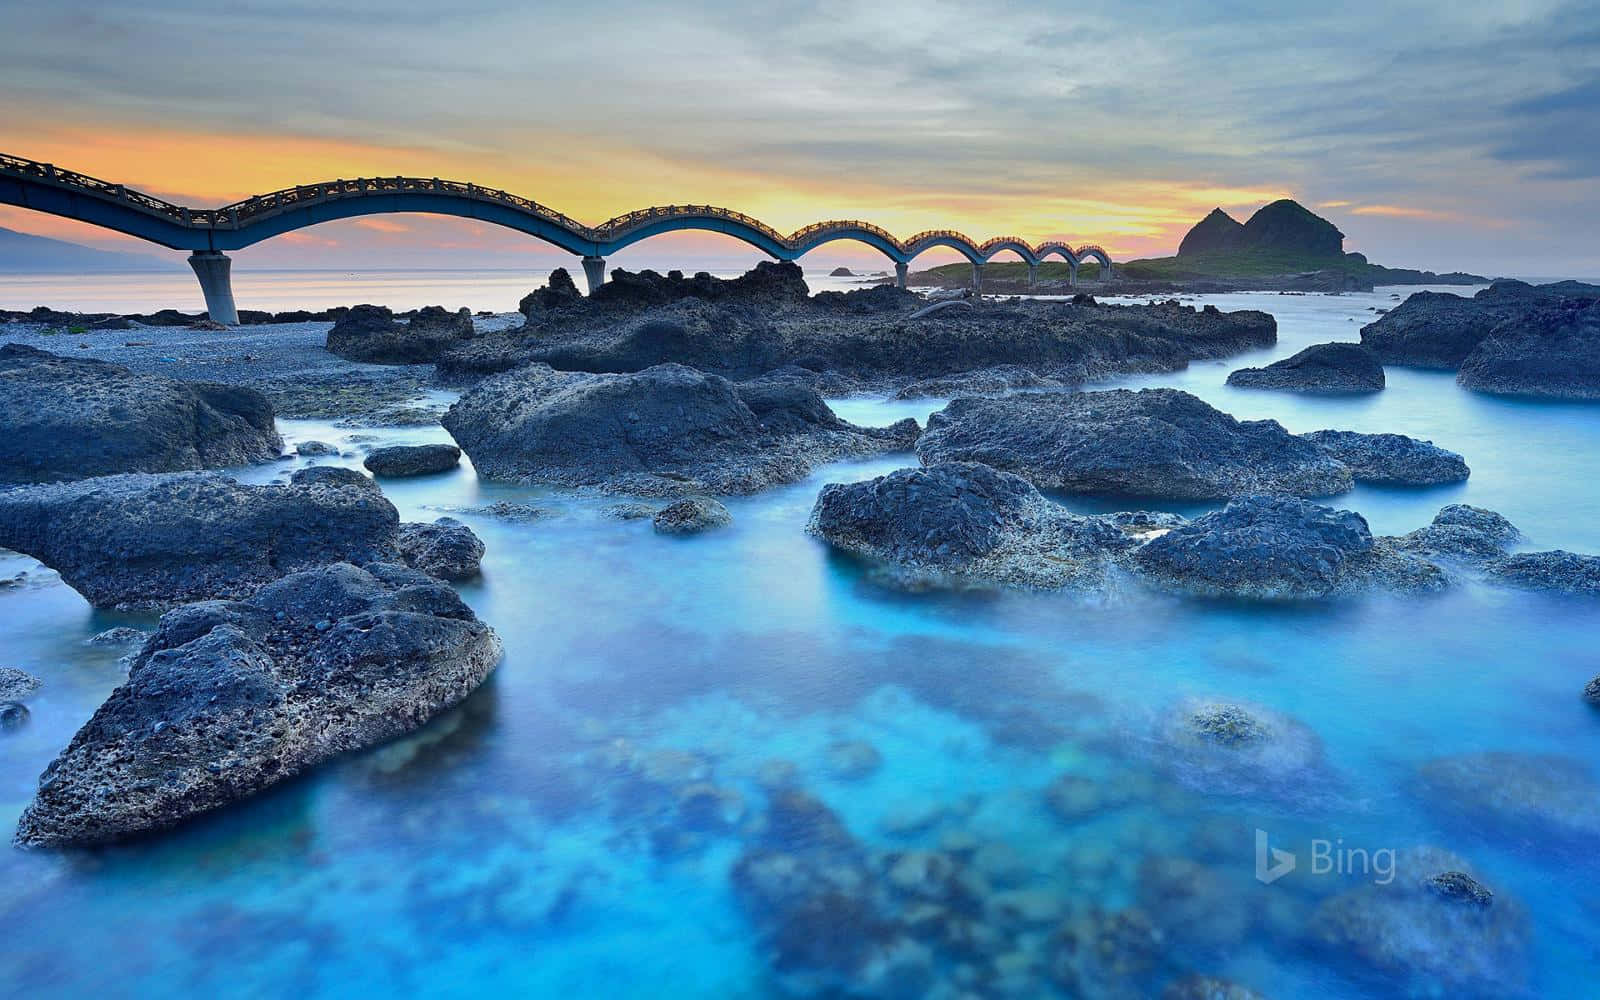 A Bridge Over The Ocean With Rocks In The Background